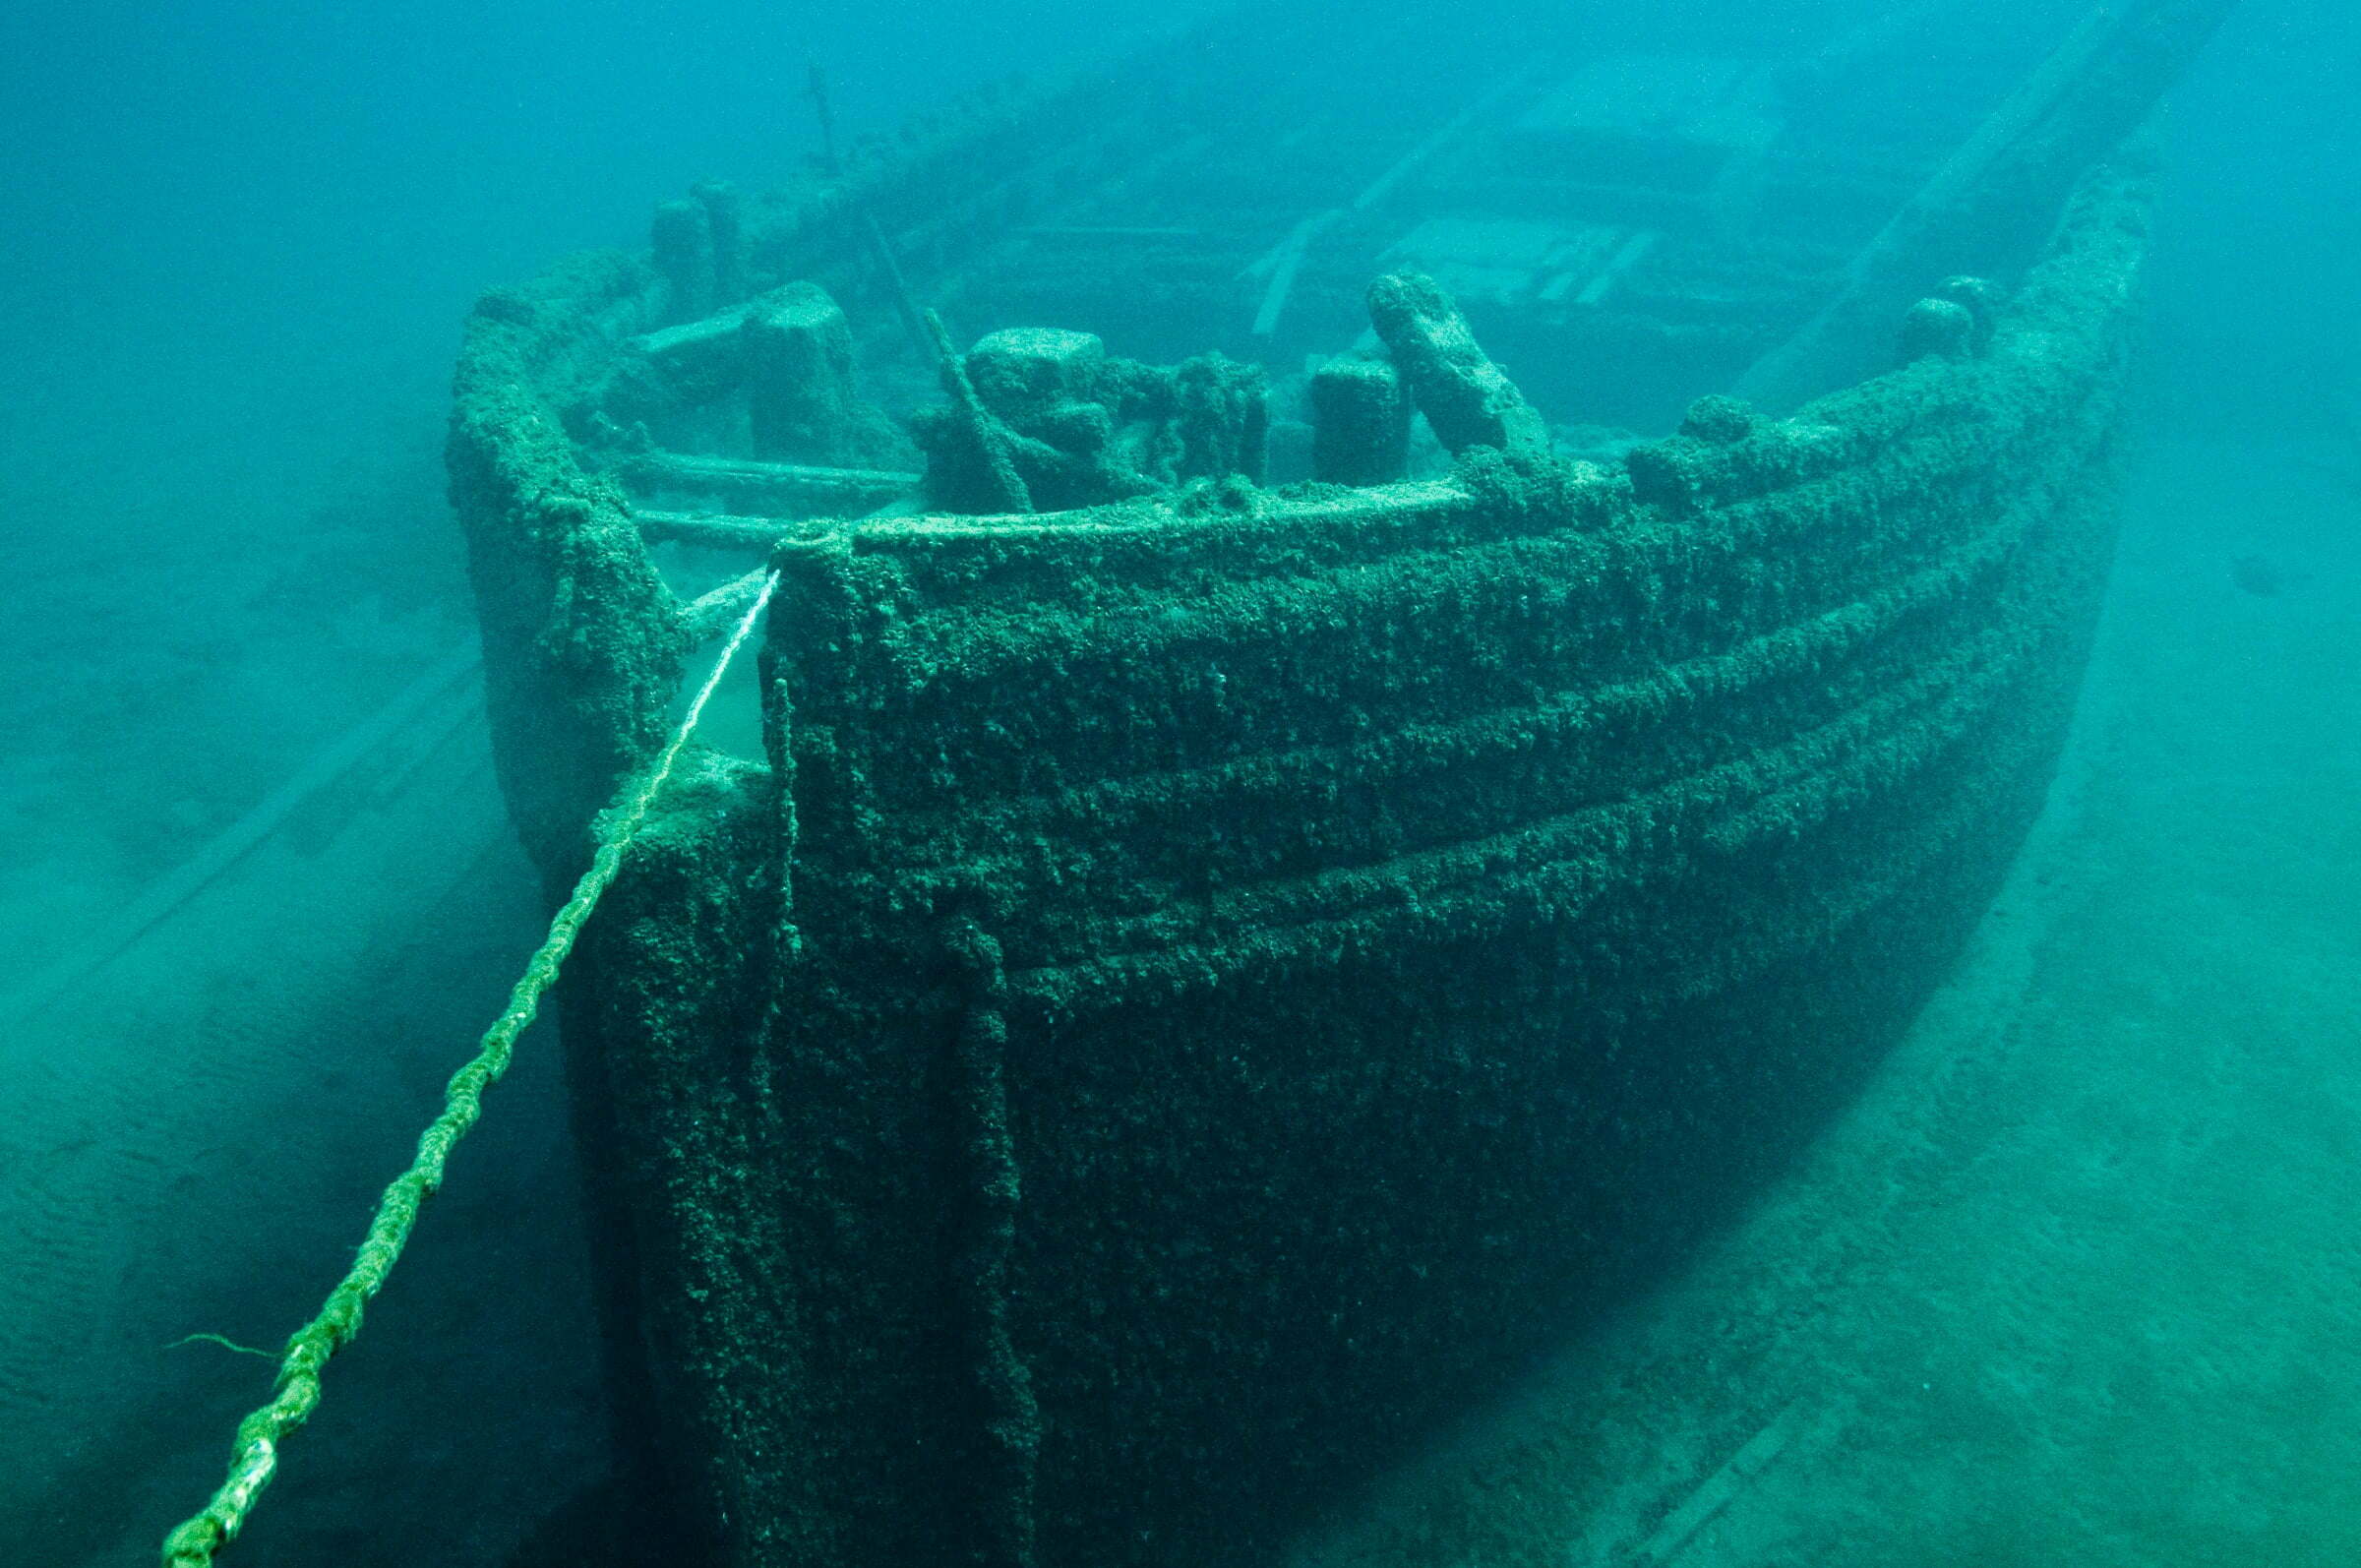 Shipwreck of the schooner E. B. Allen sunk by collision. - Photo by NOAA at Unsplash